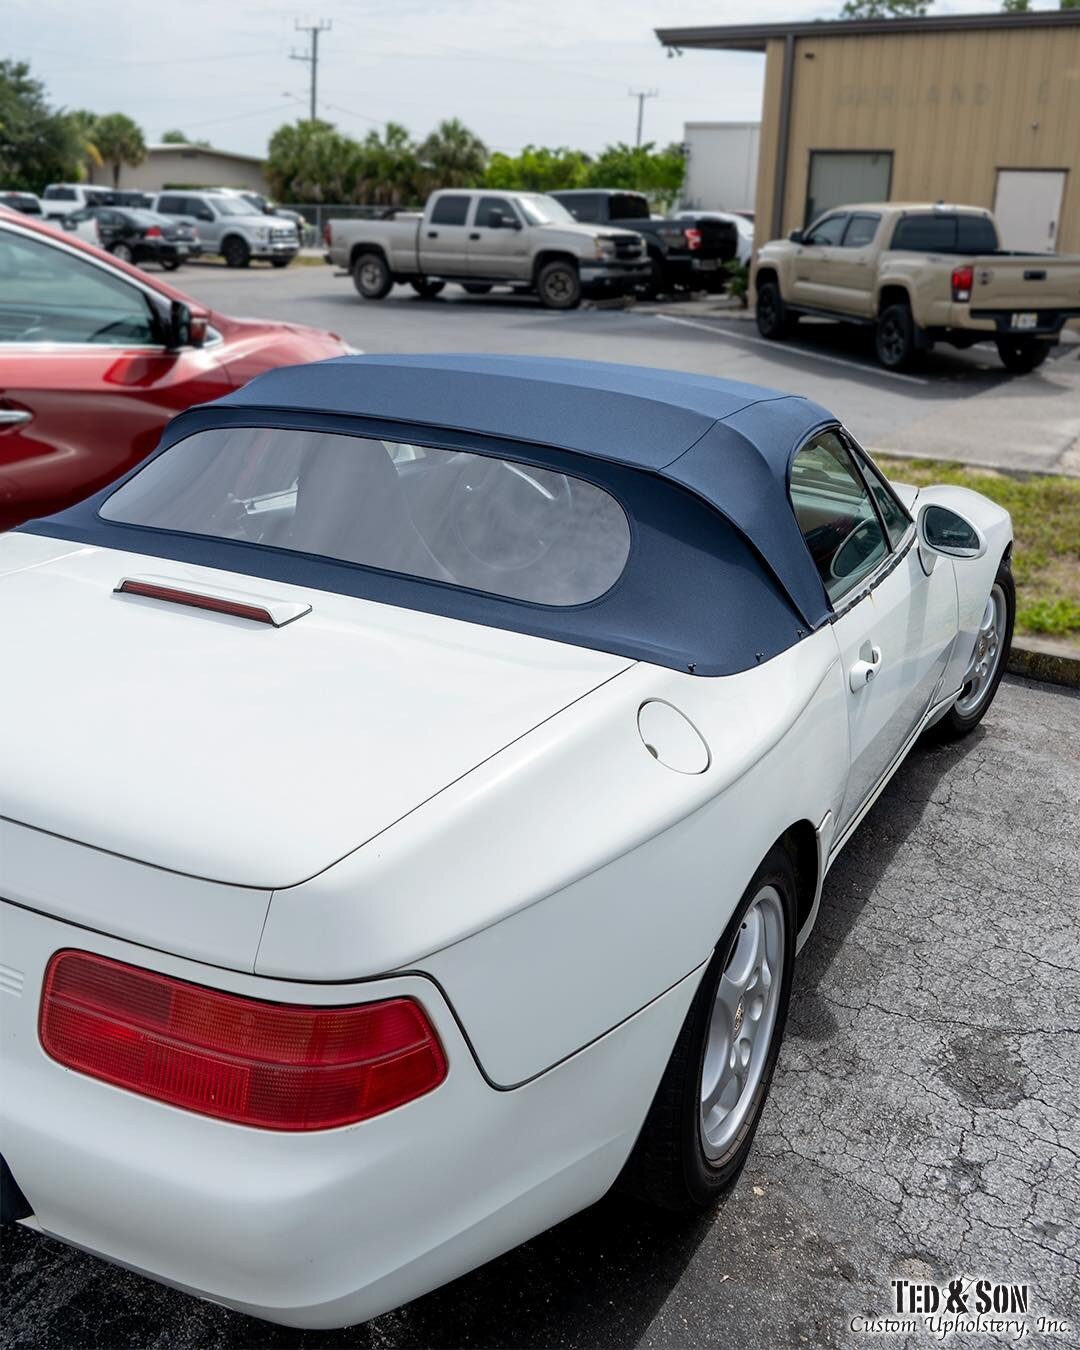 Not an easy convertible top replacement but at Ted and Son no top is too tough! Porsche 968 needed a new rear window ASAP! Now she looks like a brand new car. 

3414 Enterprise Ave 
Naples FL 34104 
239-649-6344

#Upholstery #TedandSon #customupholst